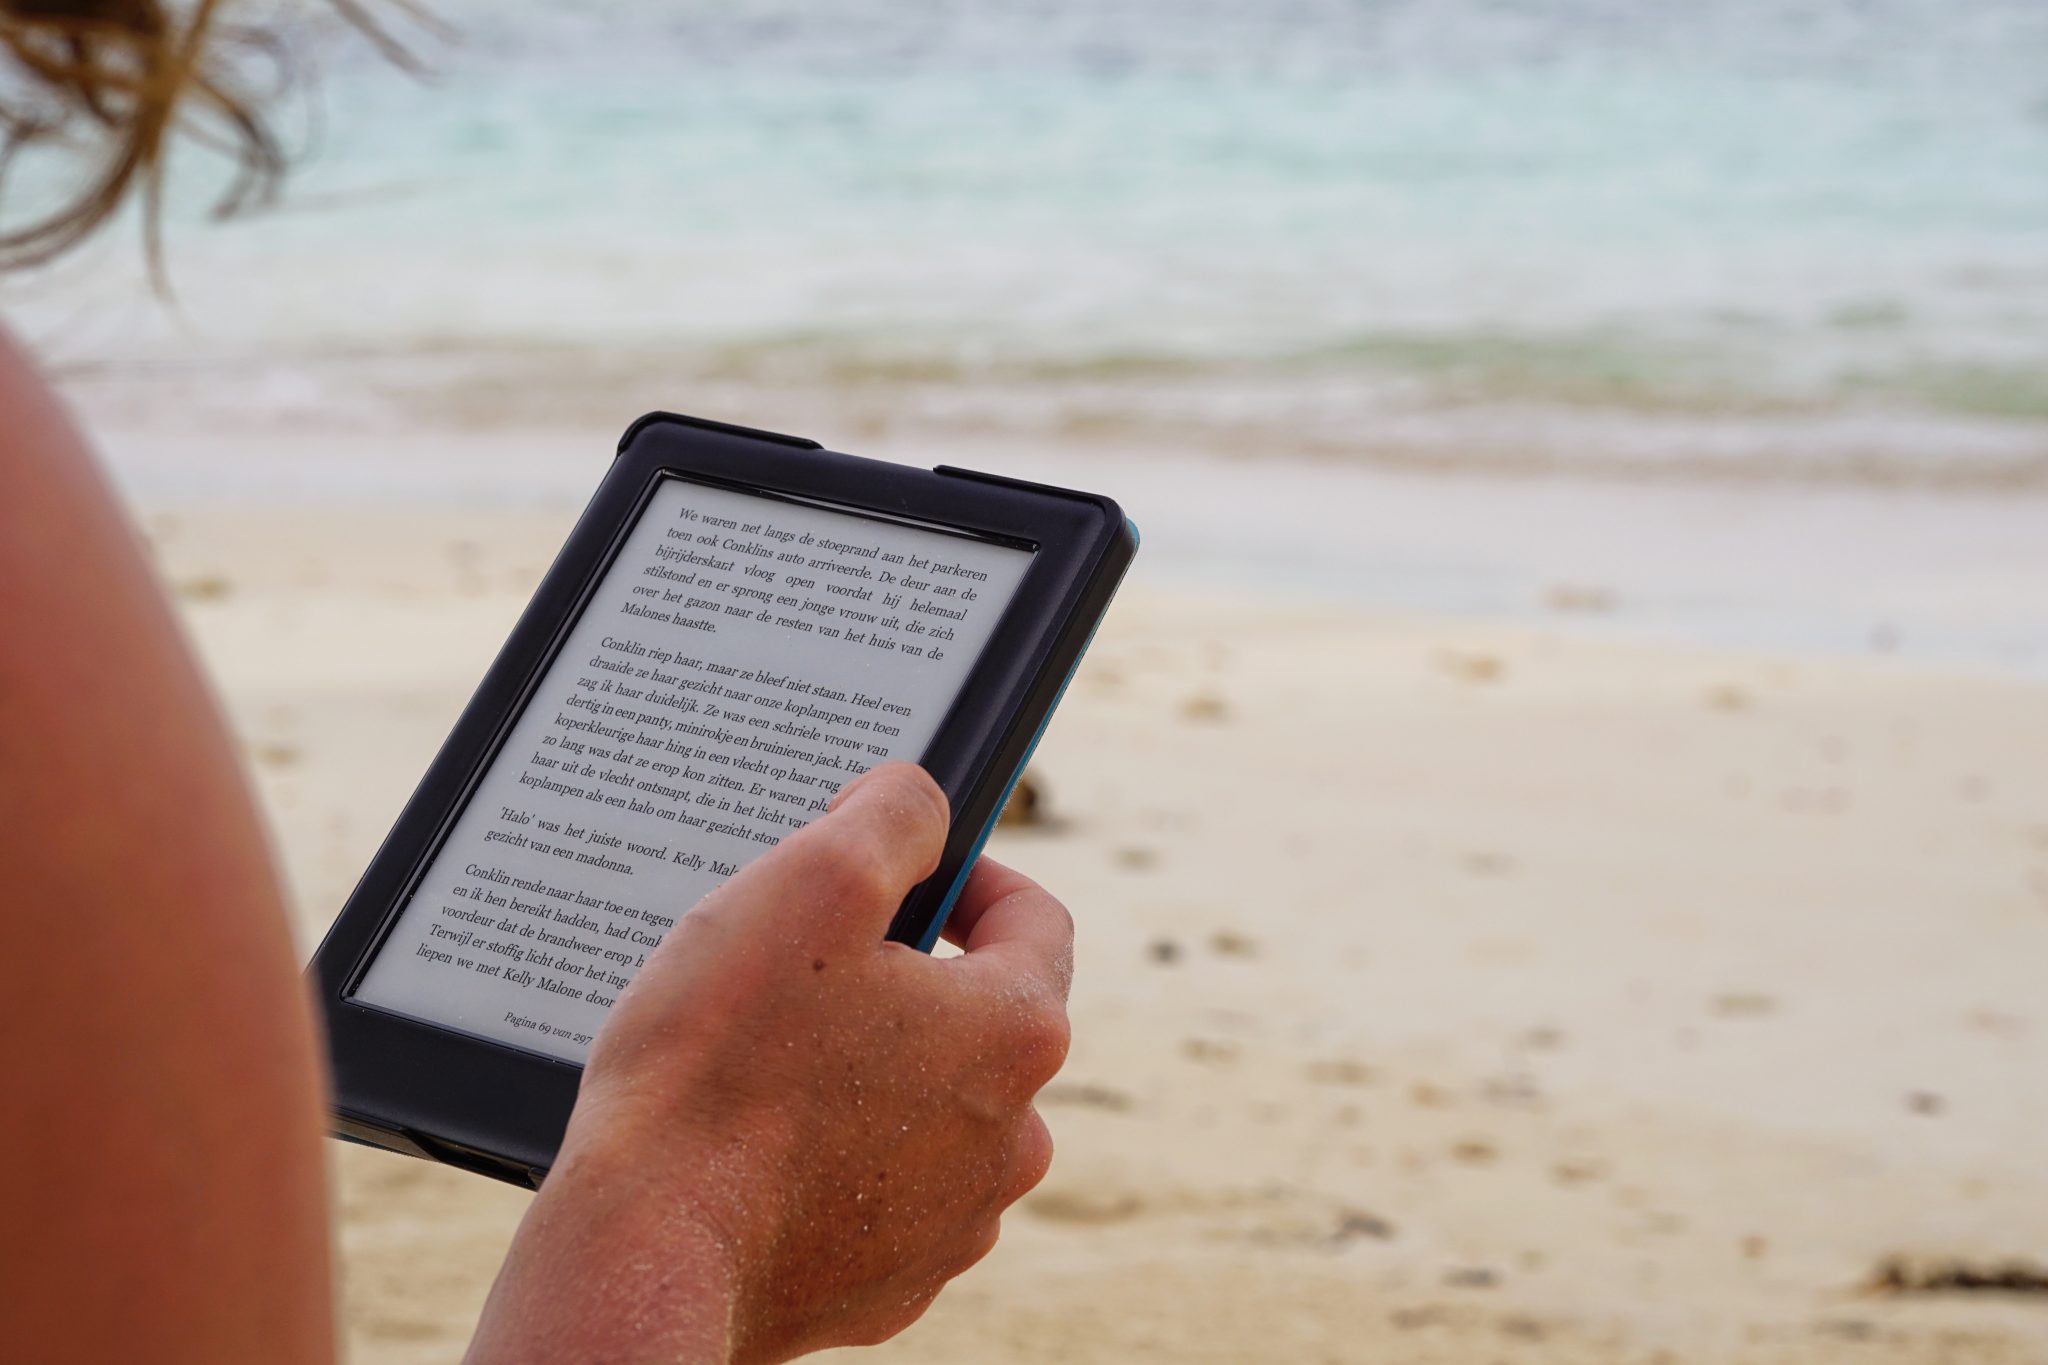 The Impact of eBook Reader Devices on the Publishing Industry